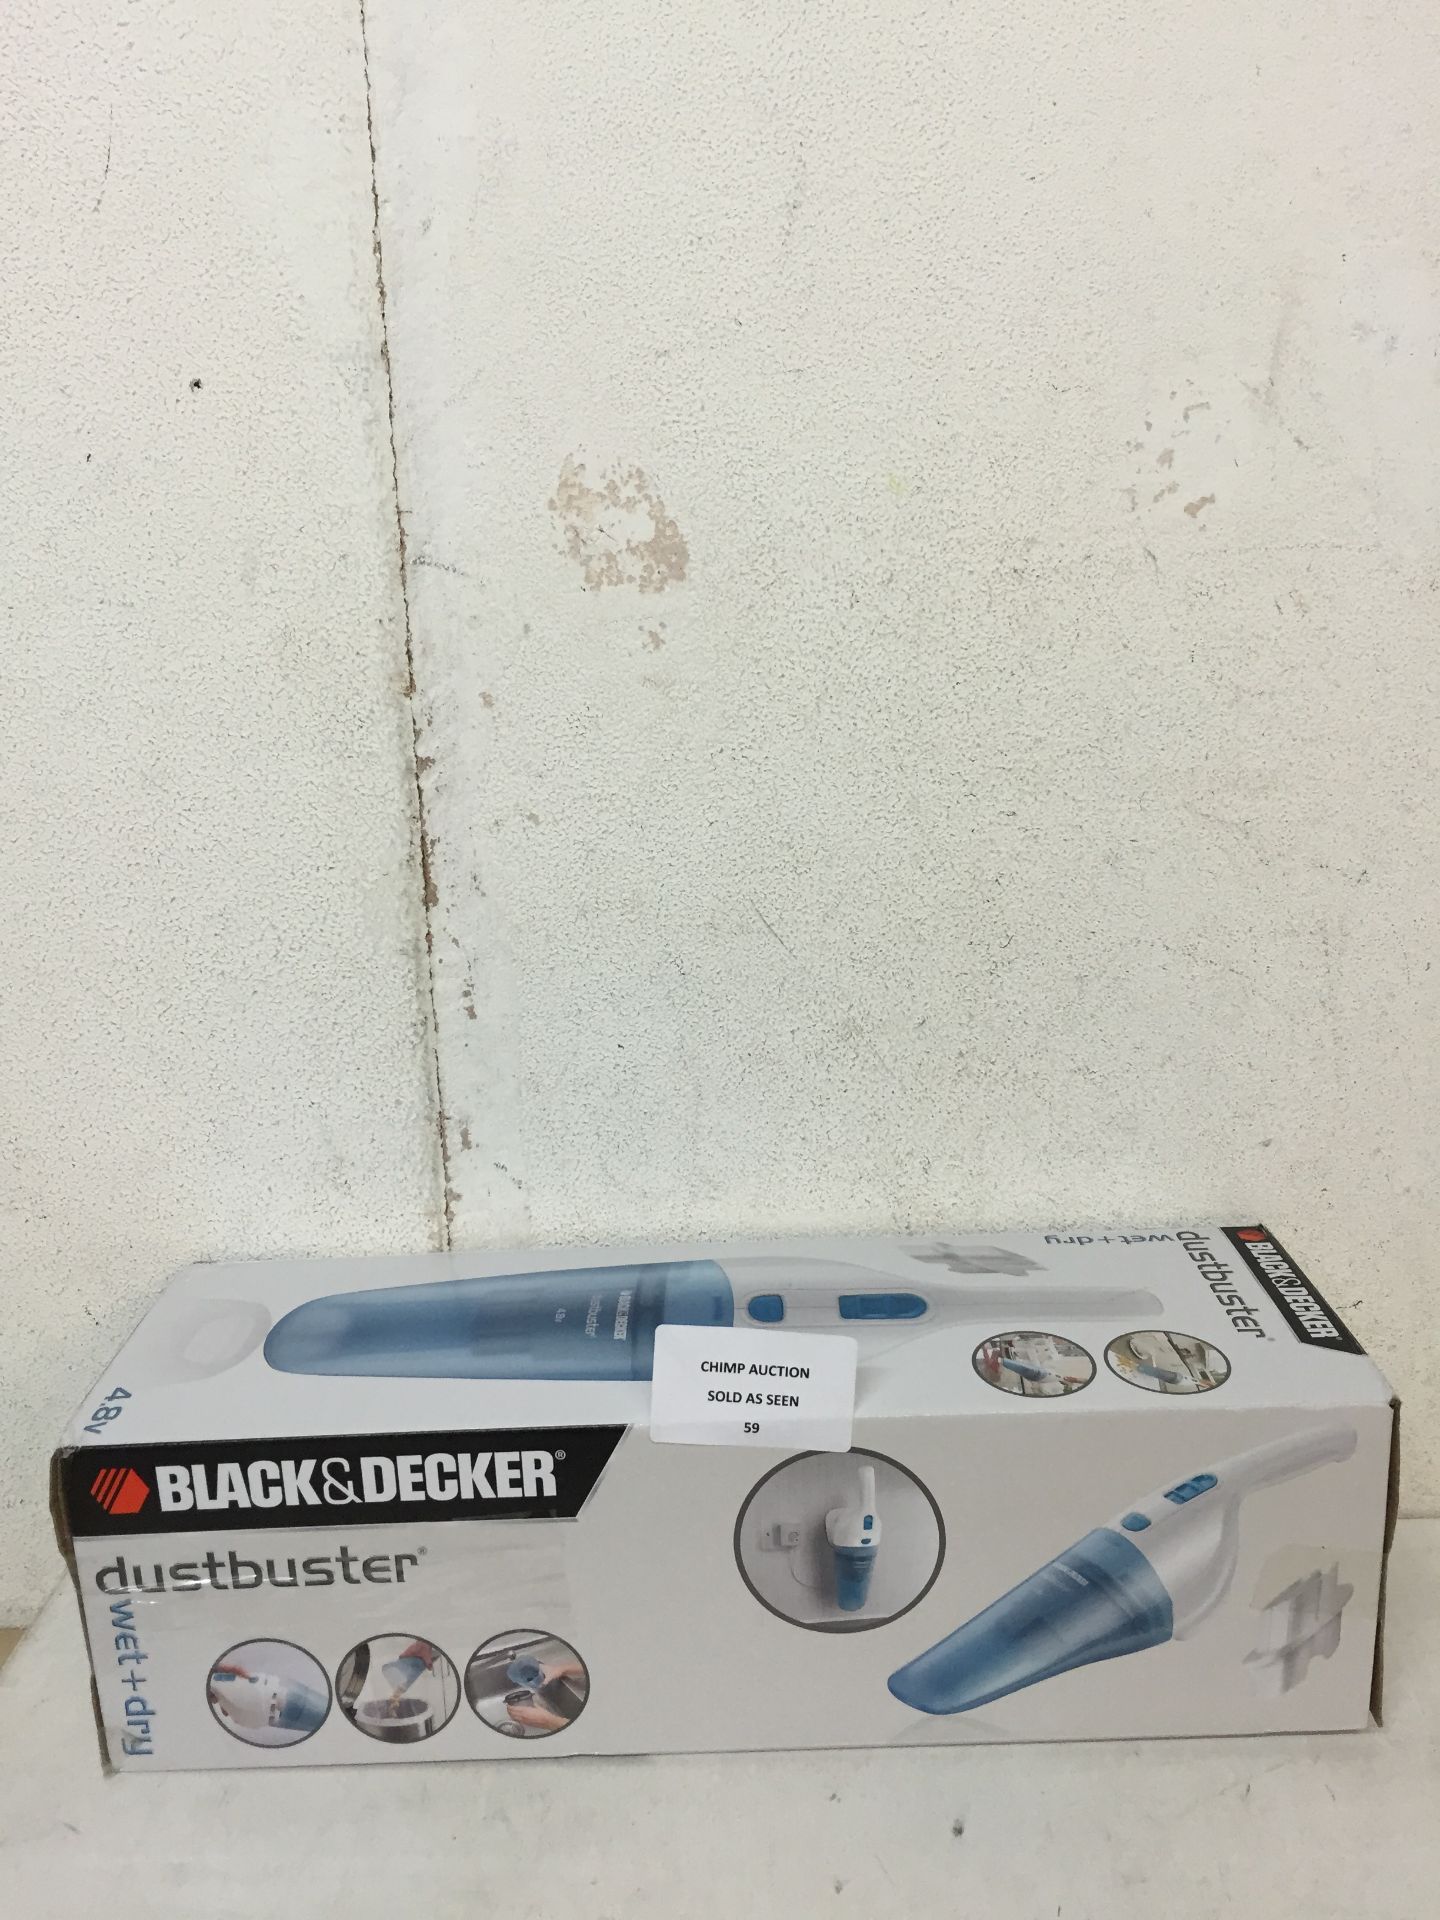 BOXED BLACK & DECKER DUSTBUSTER WET & DRY / UNTESTED